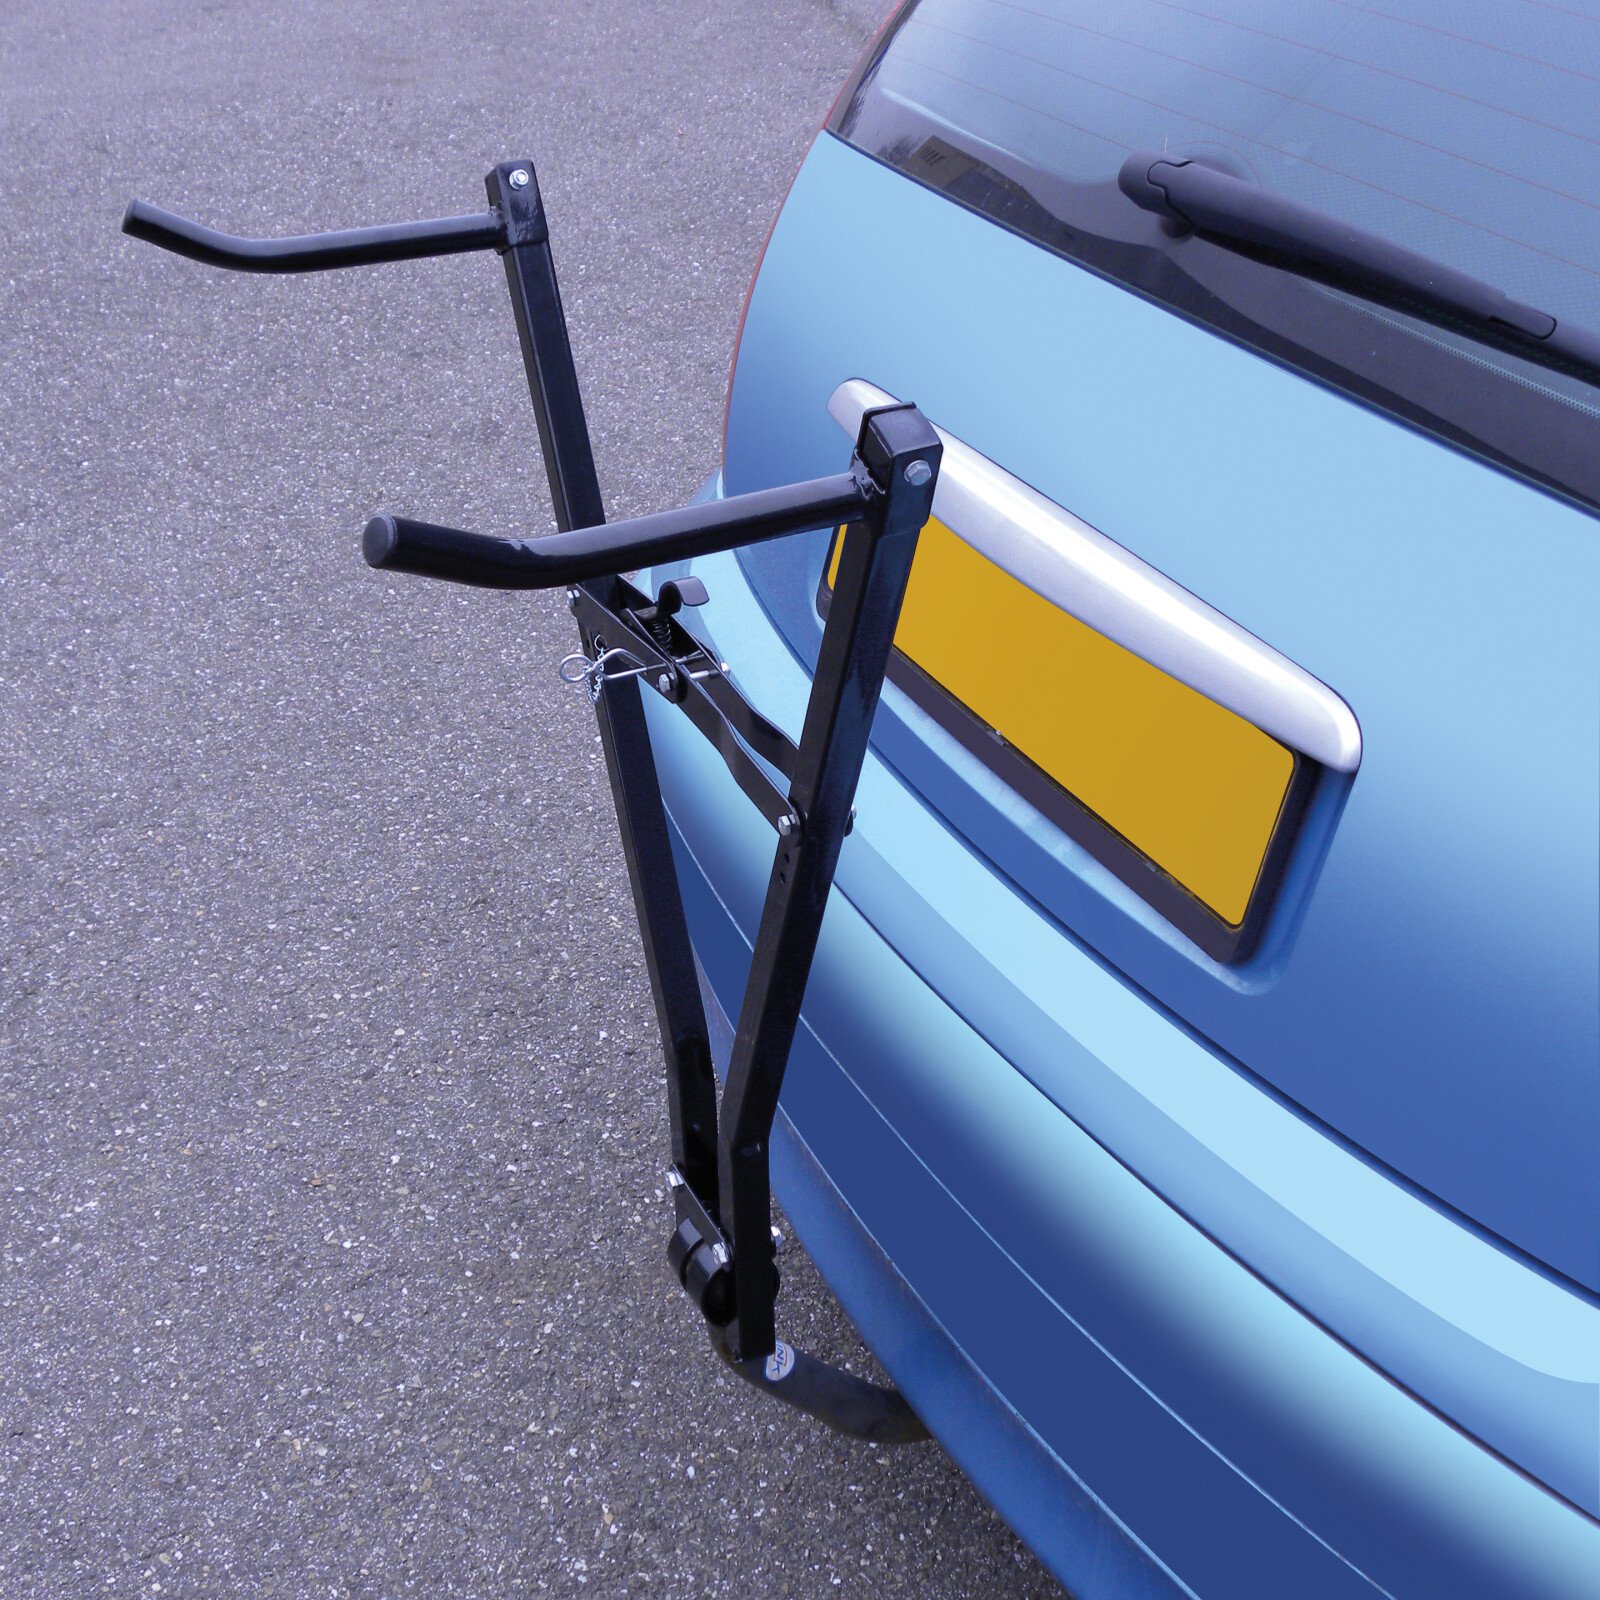 Bike carrier towing hook with license plate holder thumb